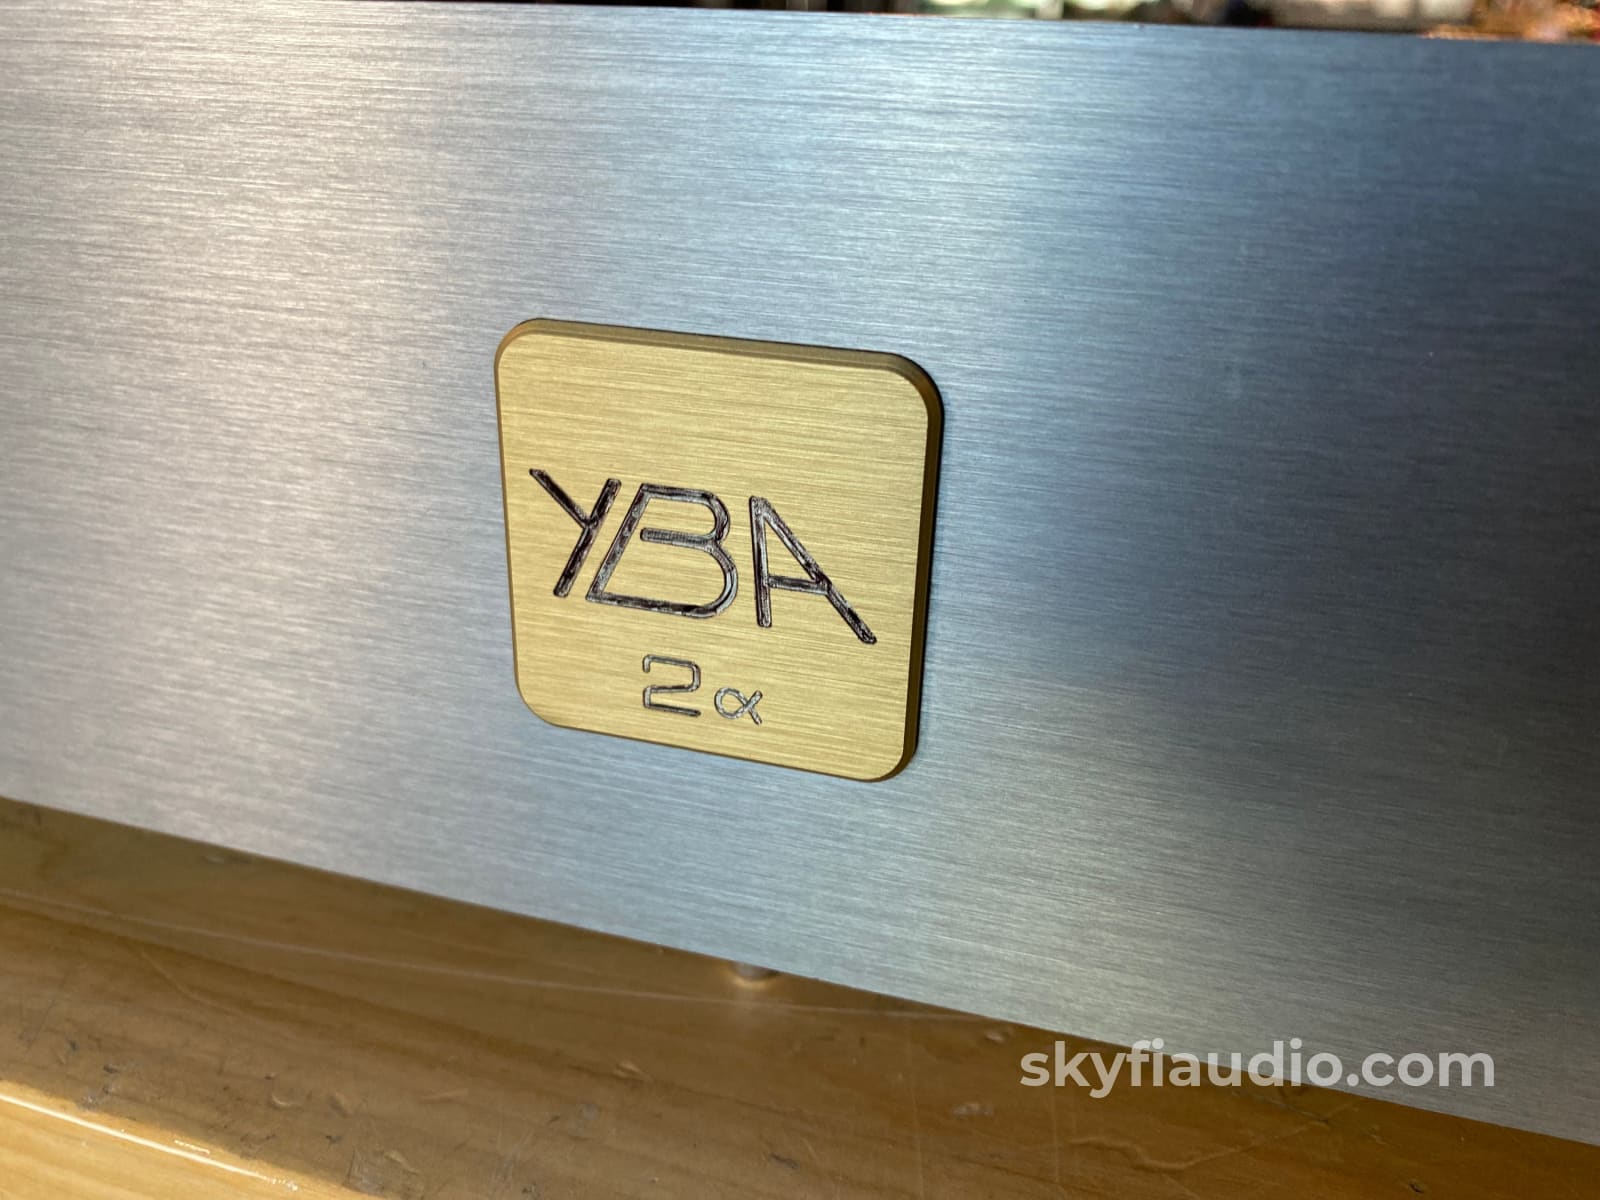 Yba 2 Amplifier Made In France - Stereophile Recommended